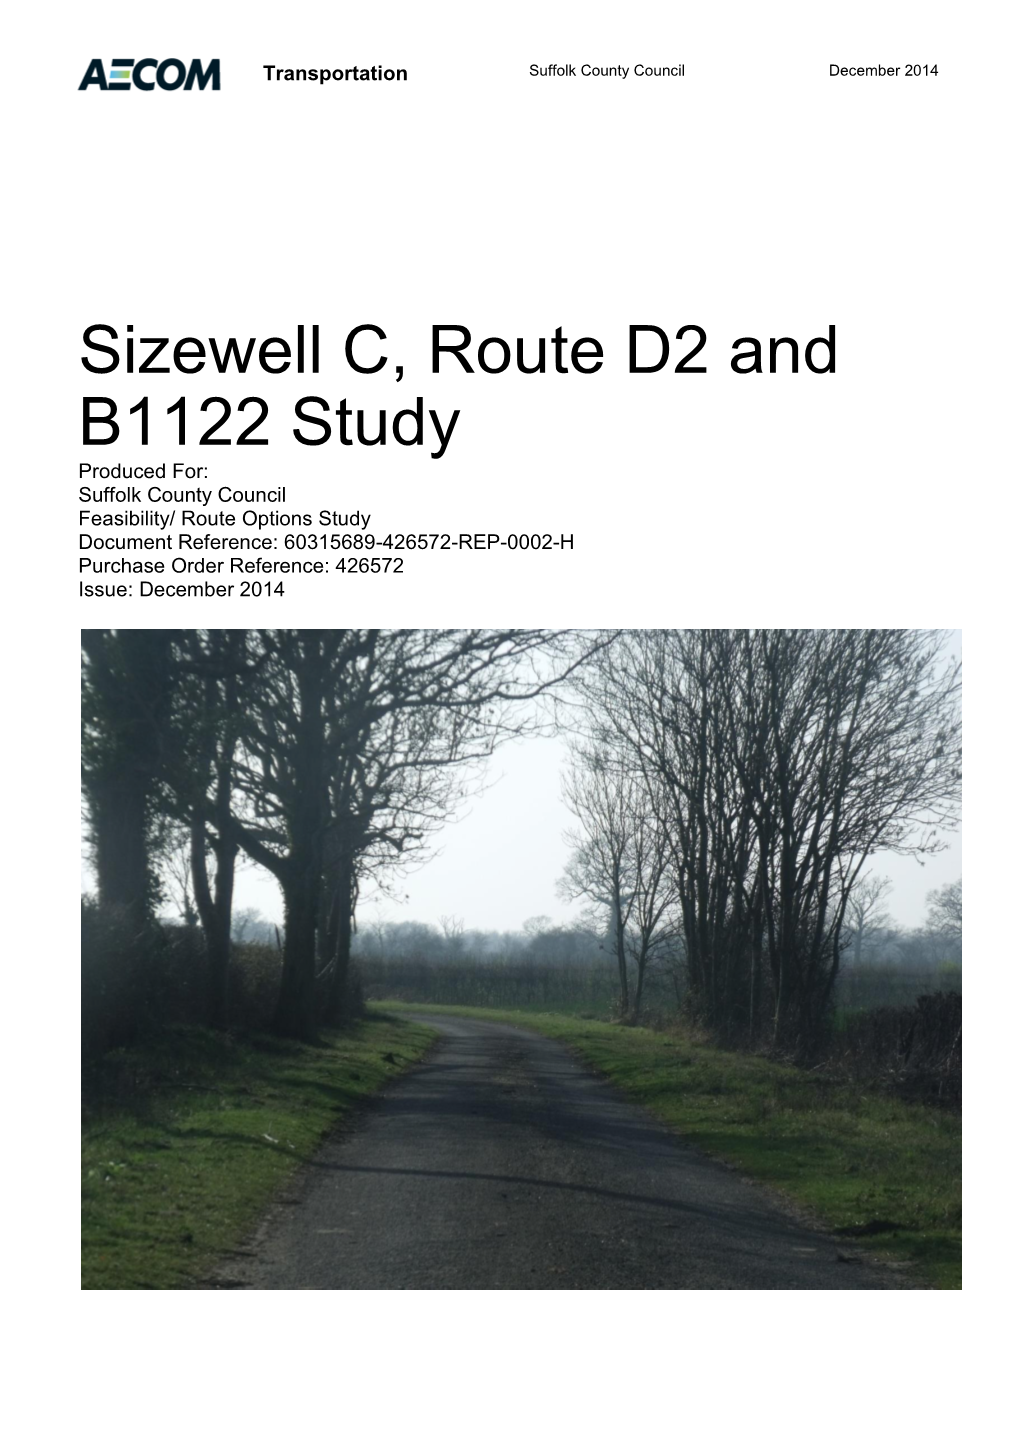 Sizewell C, Route D2 and B1122 Study